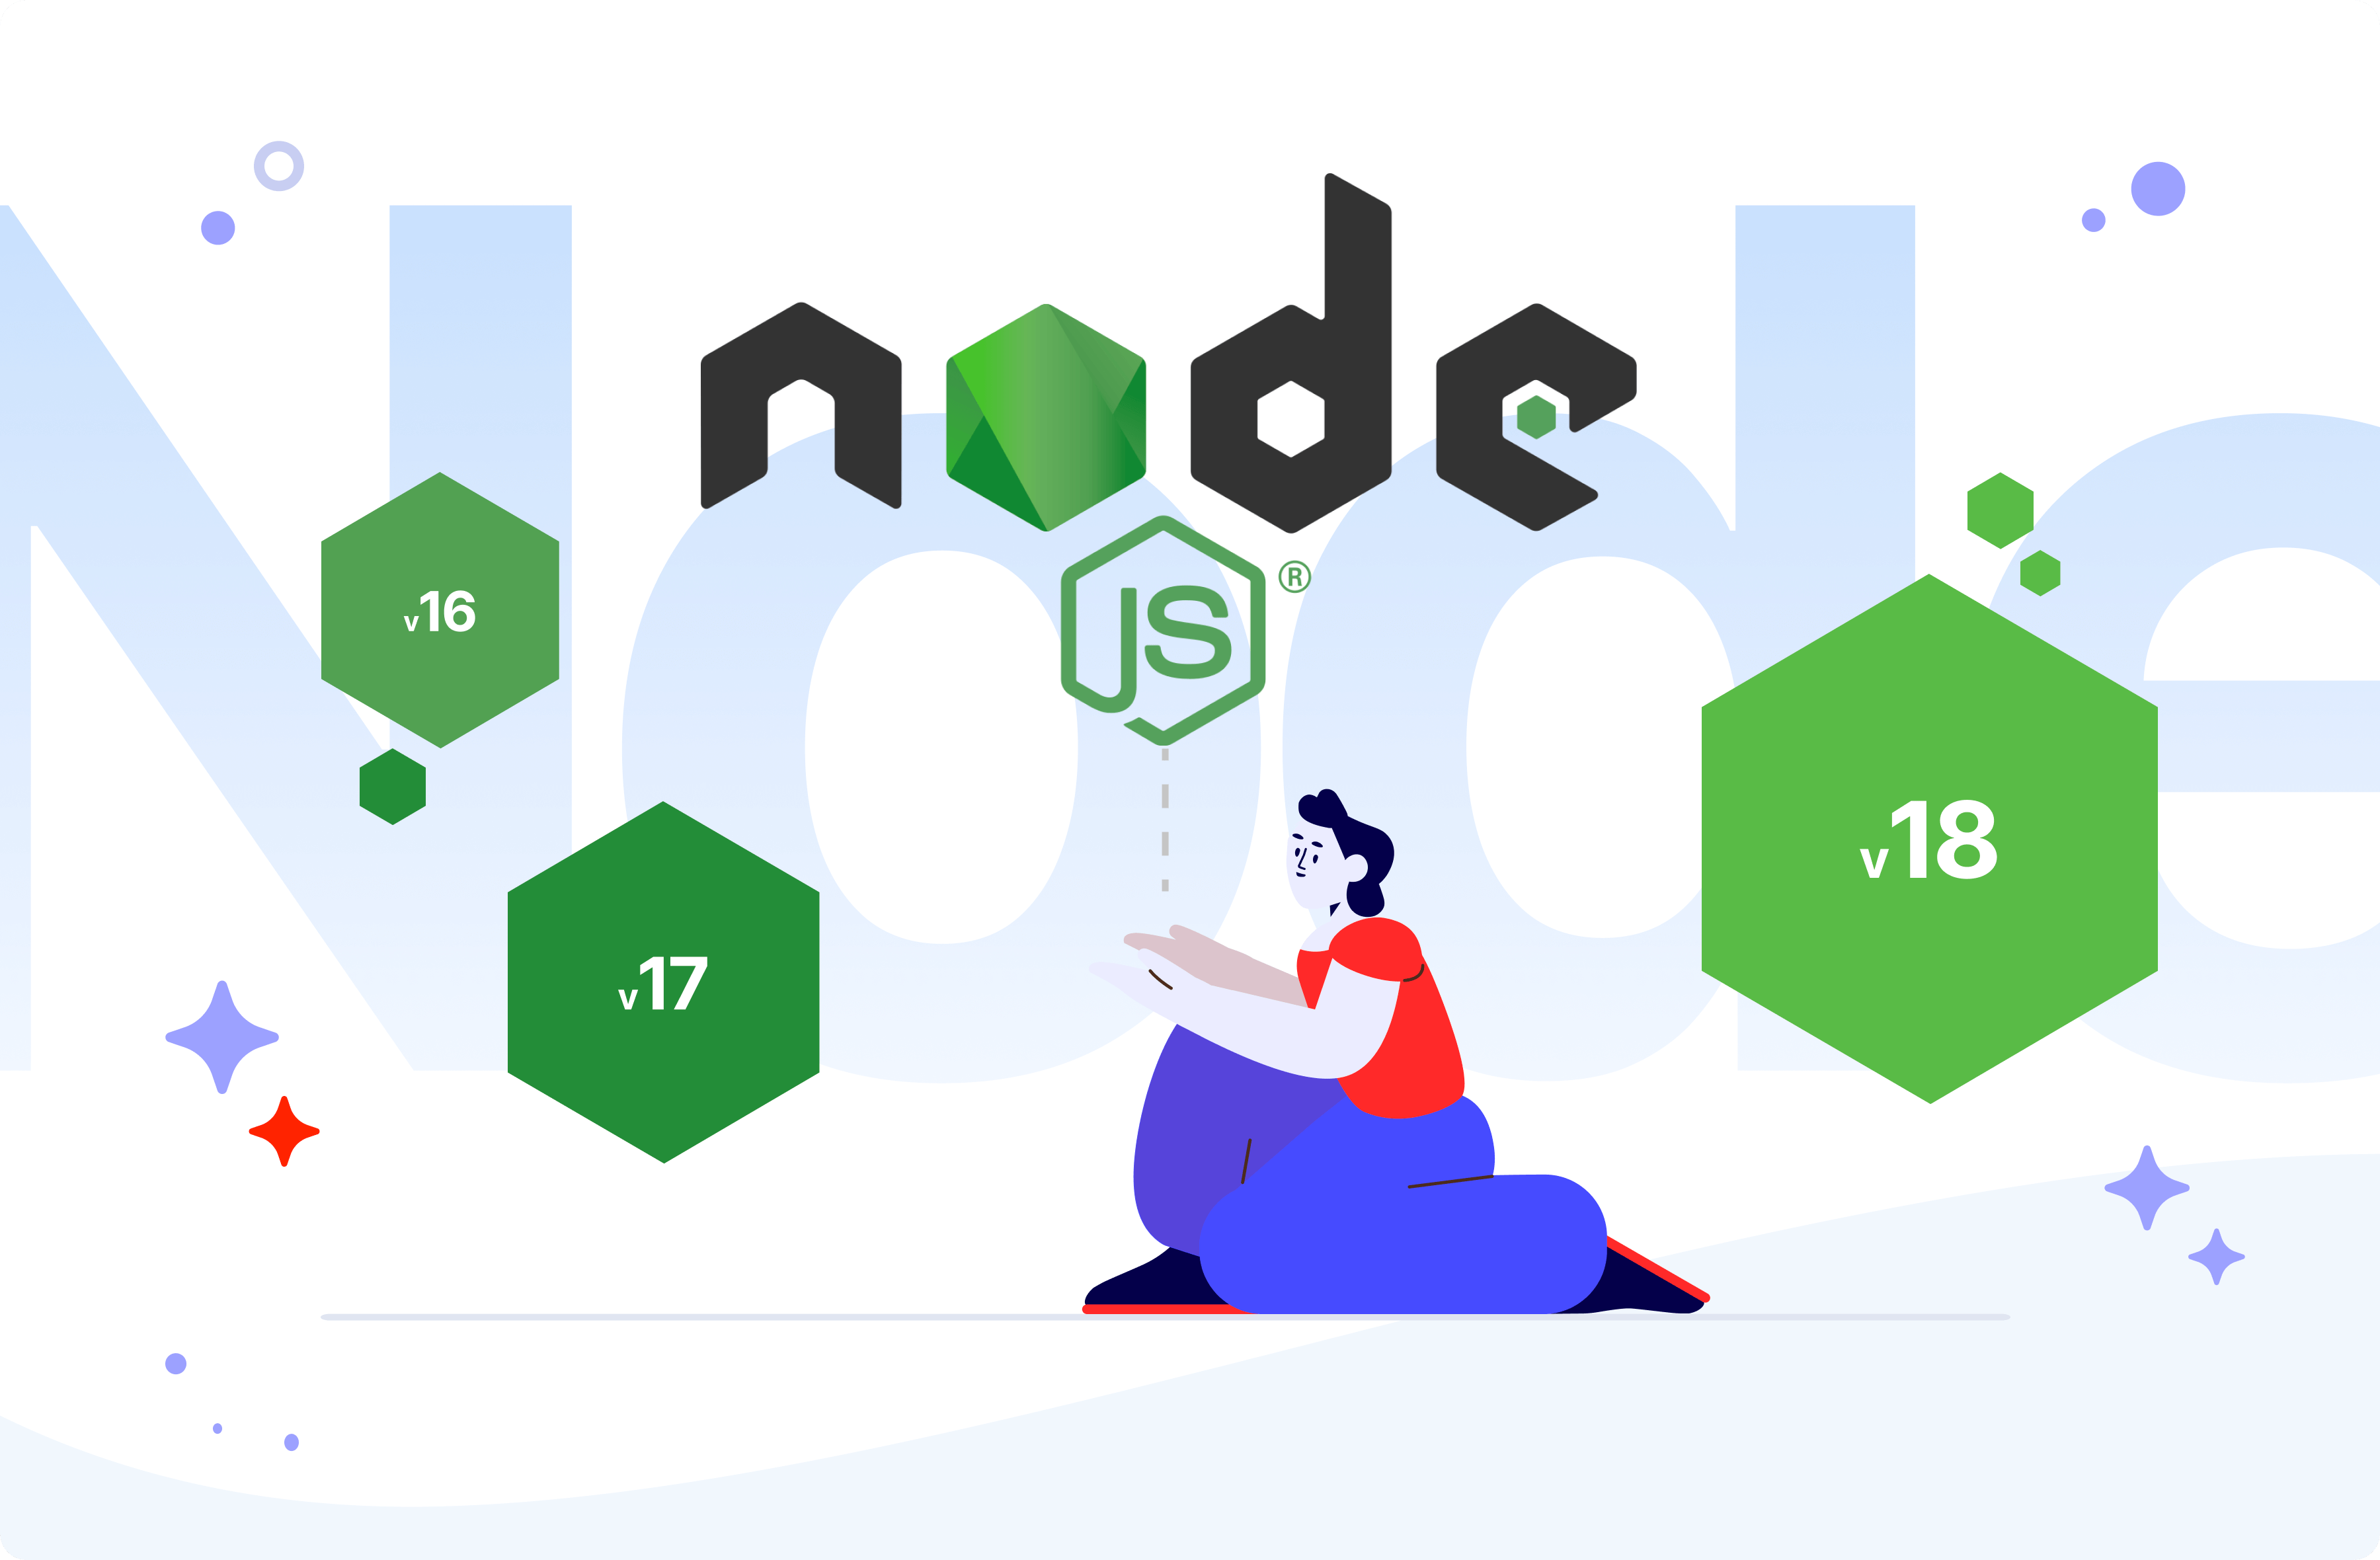 New Node.js features bring a global fetch API & test runner. Check out the Node version 16-18 report